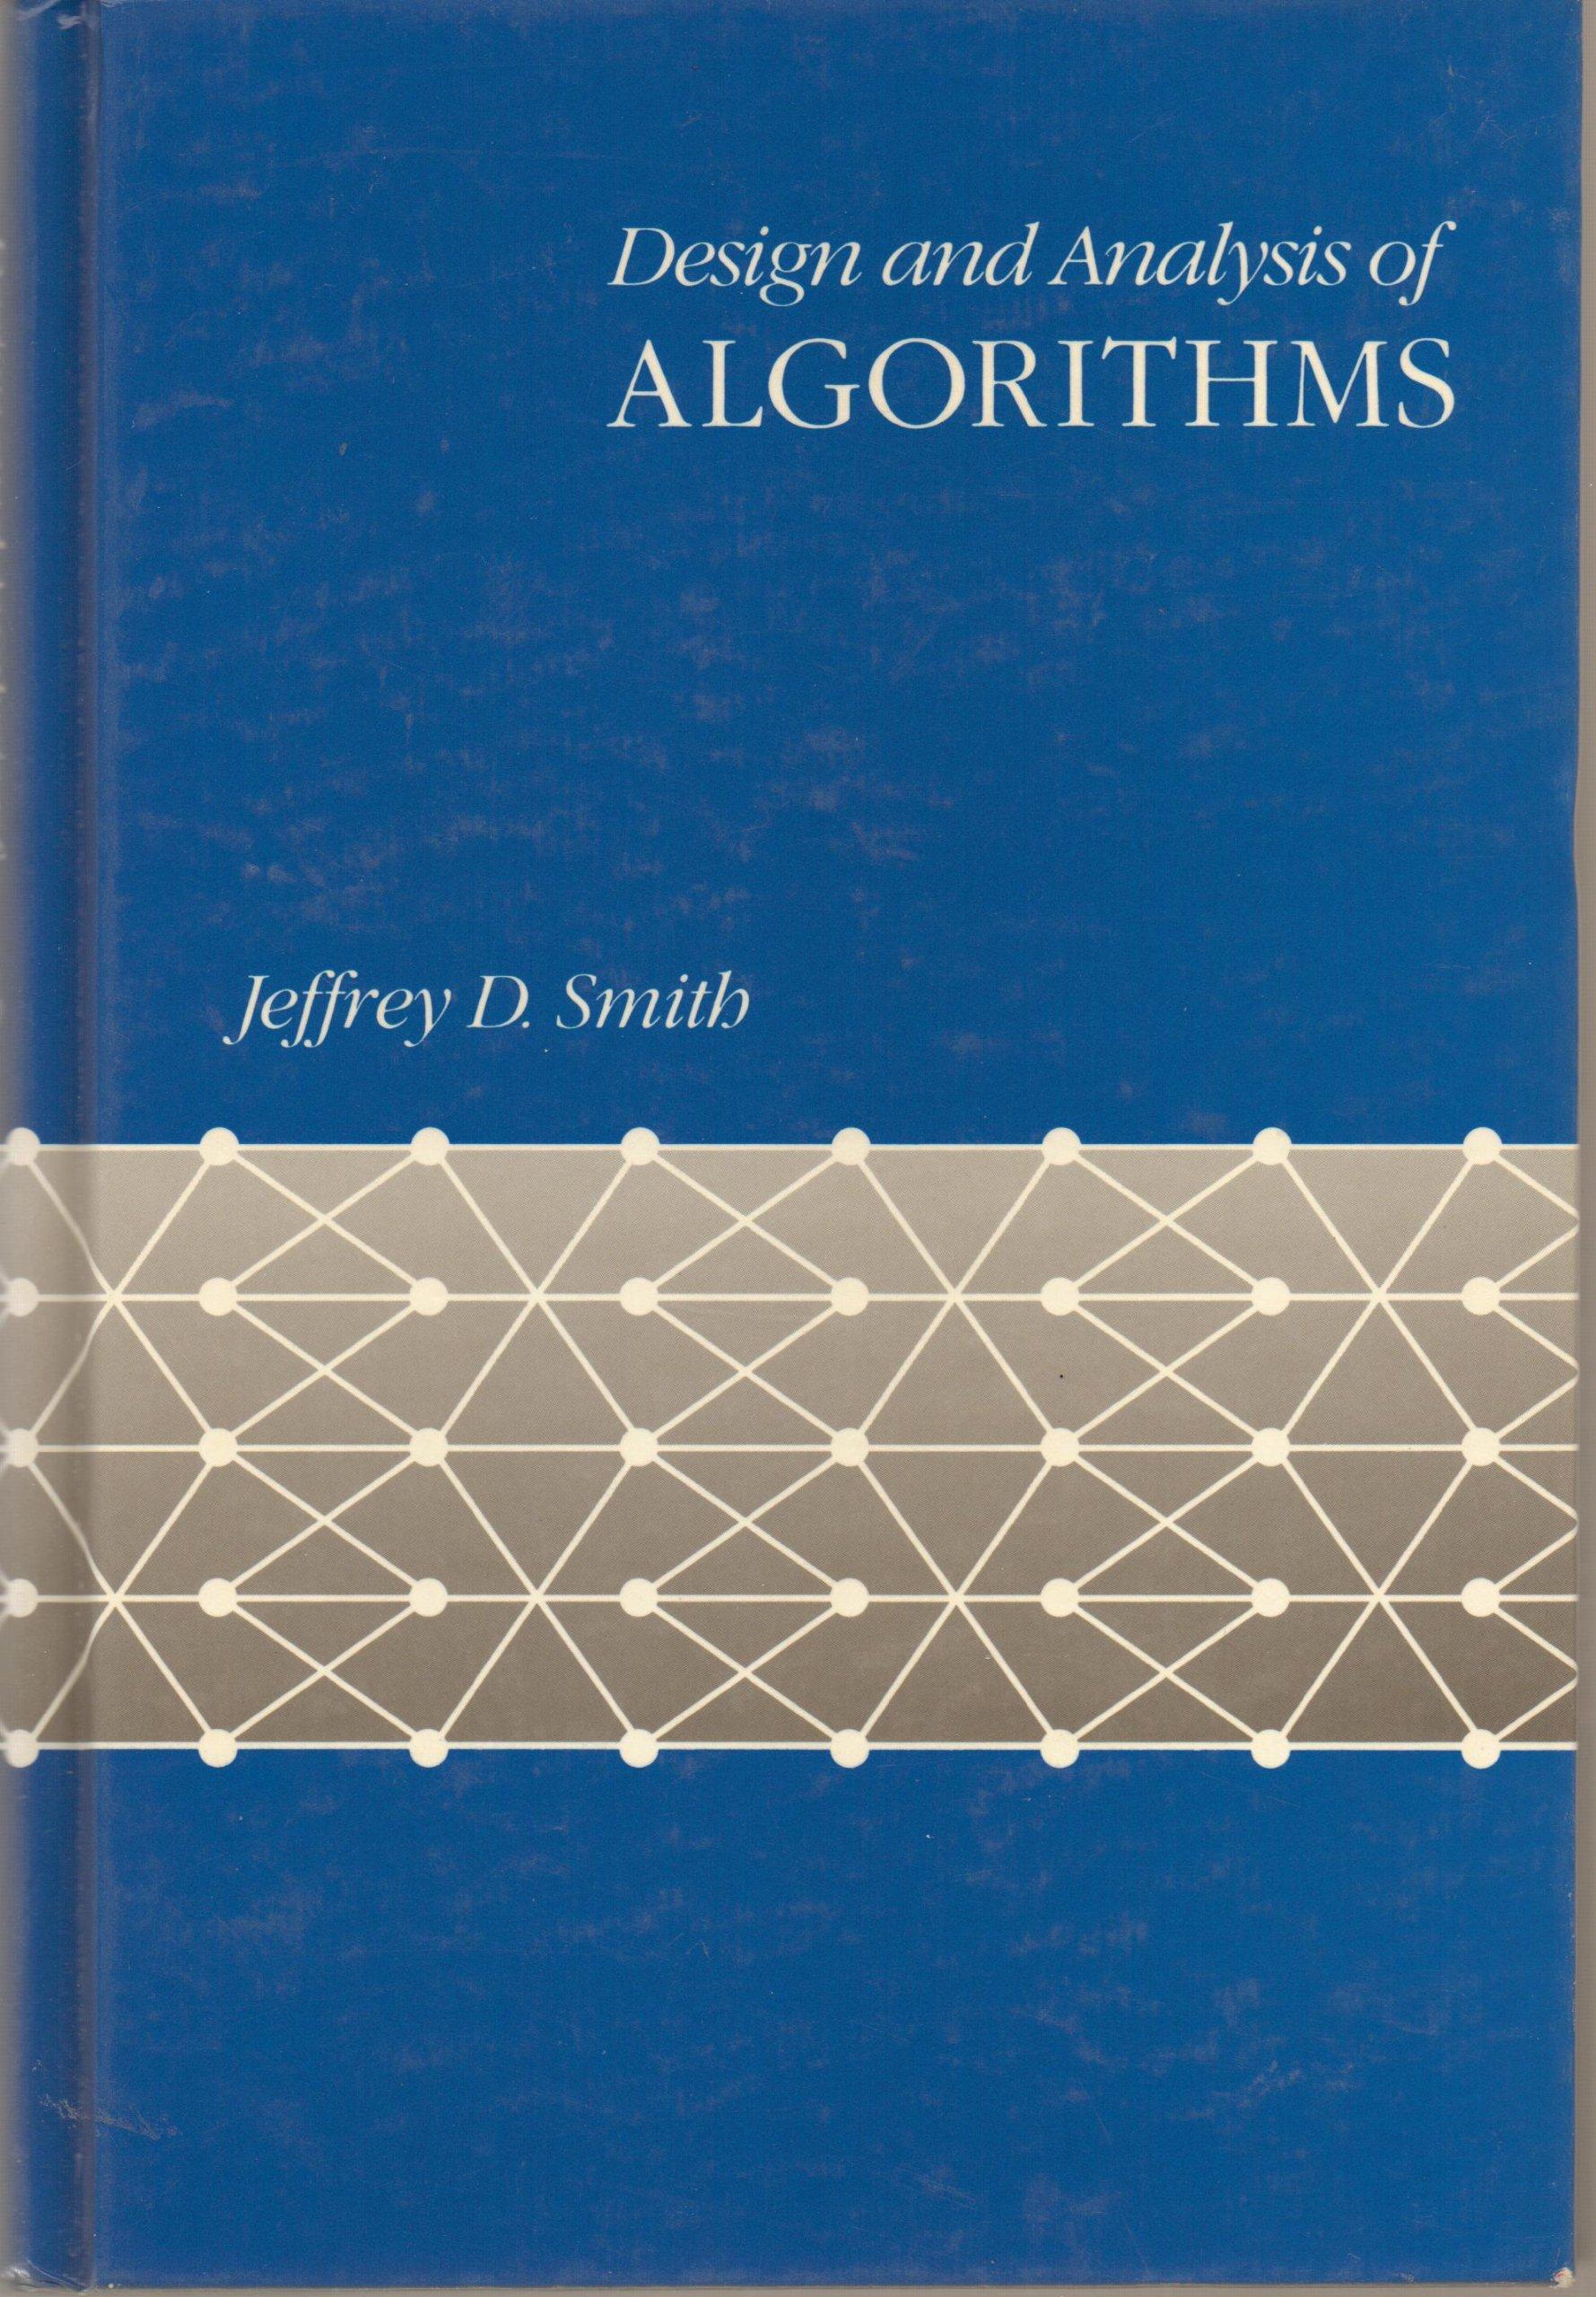 design and analysis of algorithms 1st edition jeffrey d. smith 0534915728, 9780534915728